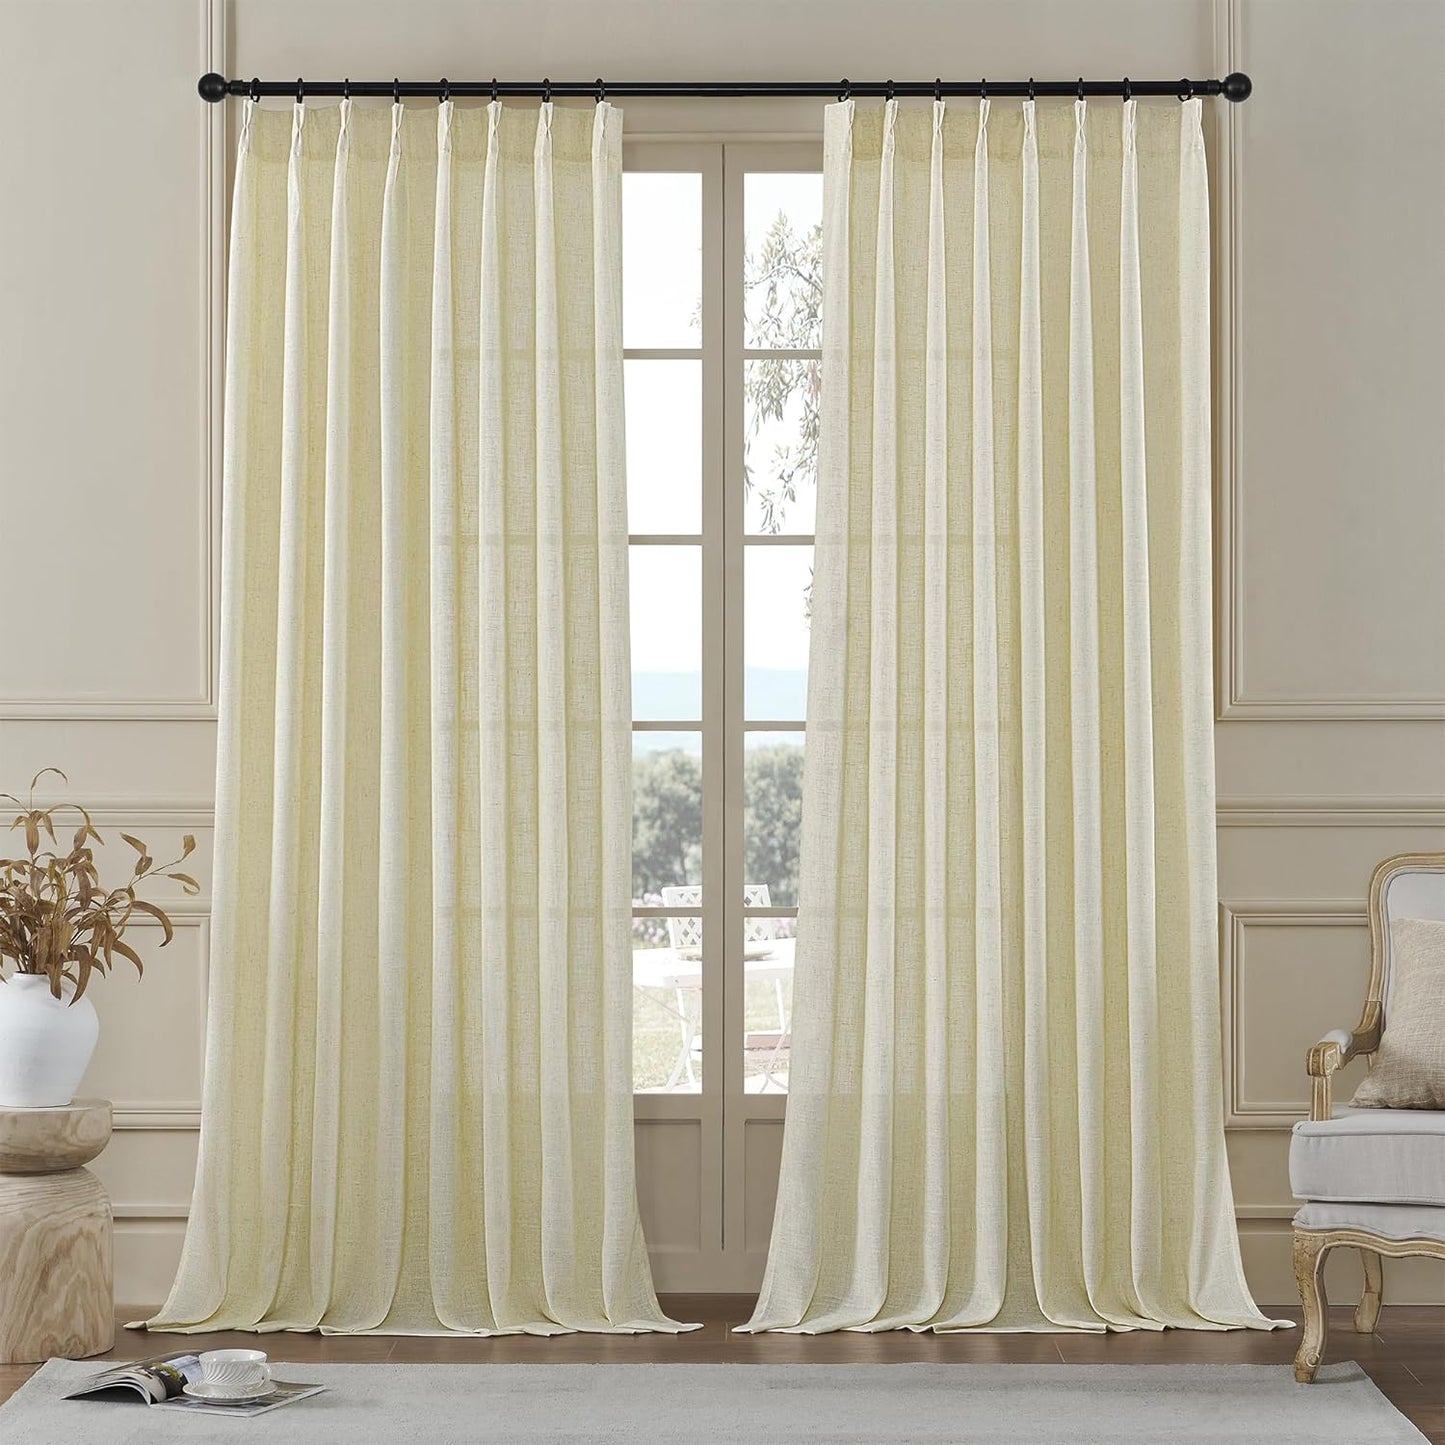 MASWOND White Pinch Pleated Curtains 90 Inches Long 2 Panels for Living Room Semi Sheer Linen Curtains Pinch Pleat Drapes for Traverse Rod Light Filtering Curtains for Dining Bedroom W38Xl90 Length  MASWOND Sand Beige 38X84 